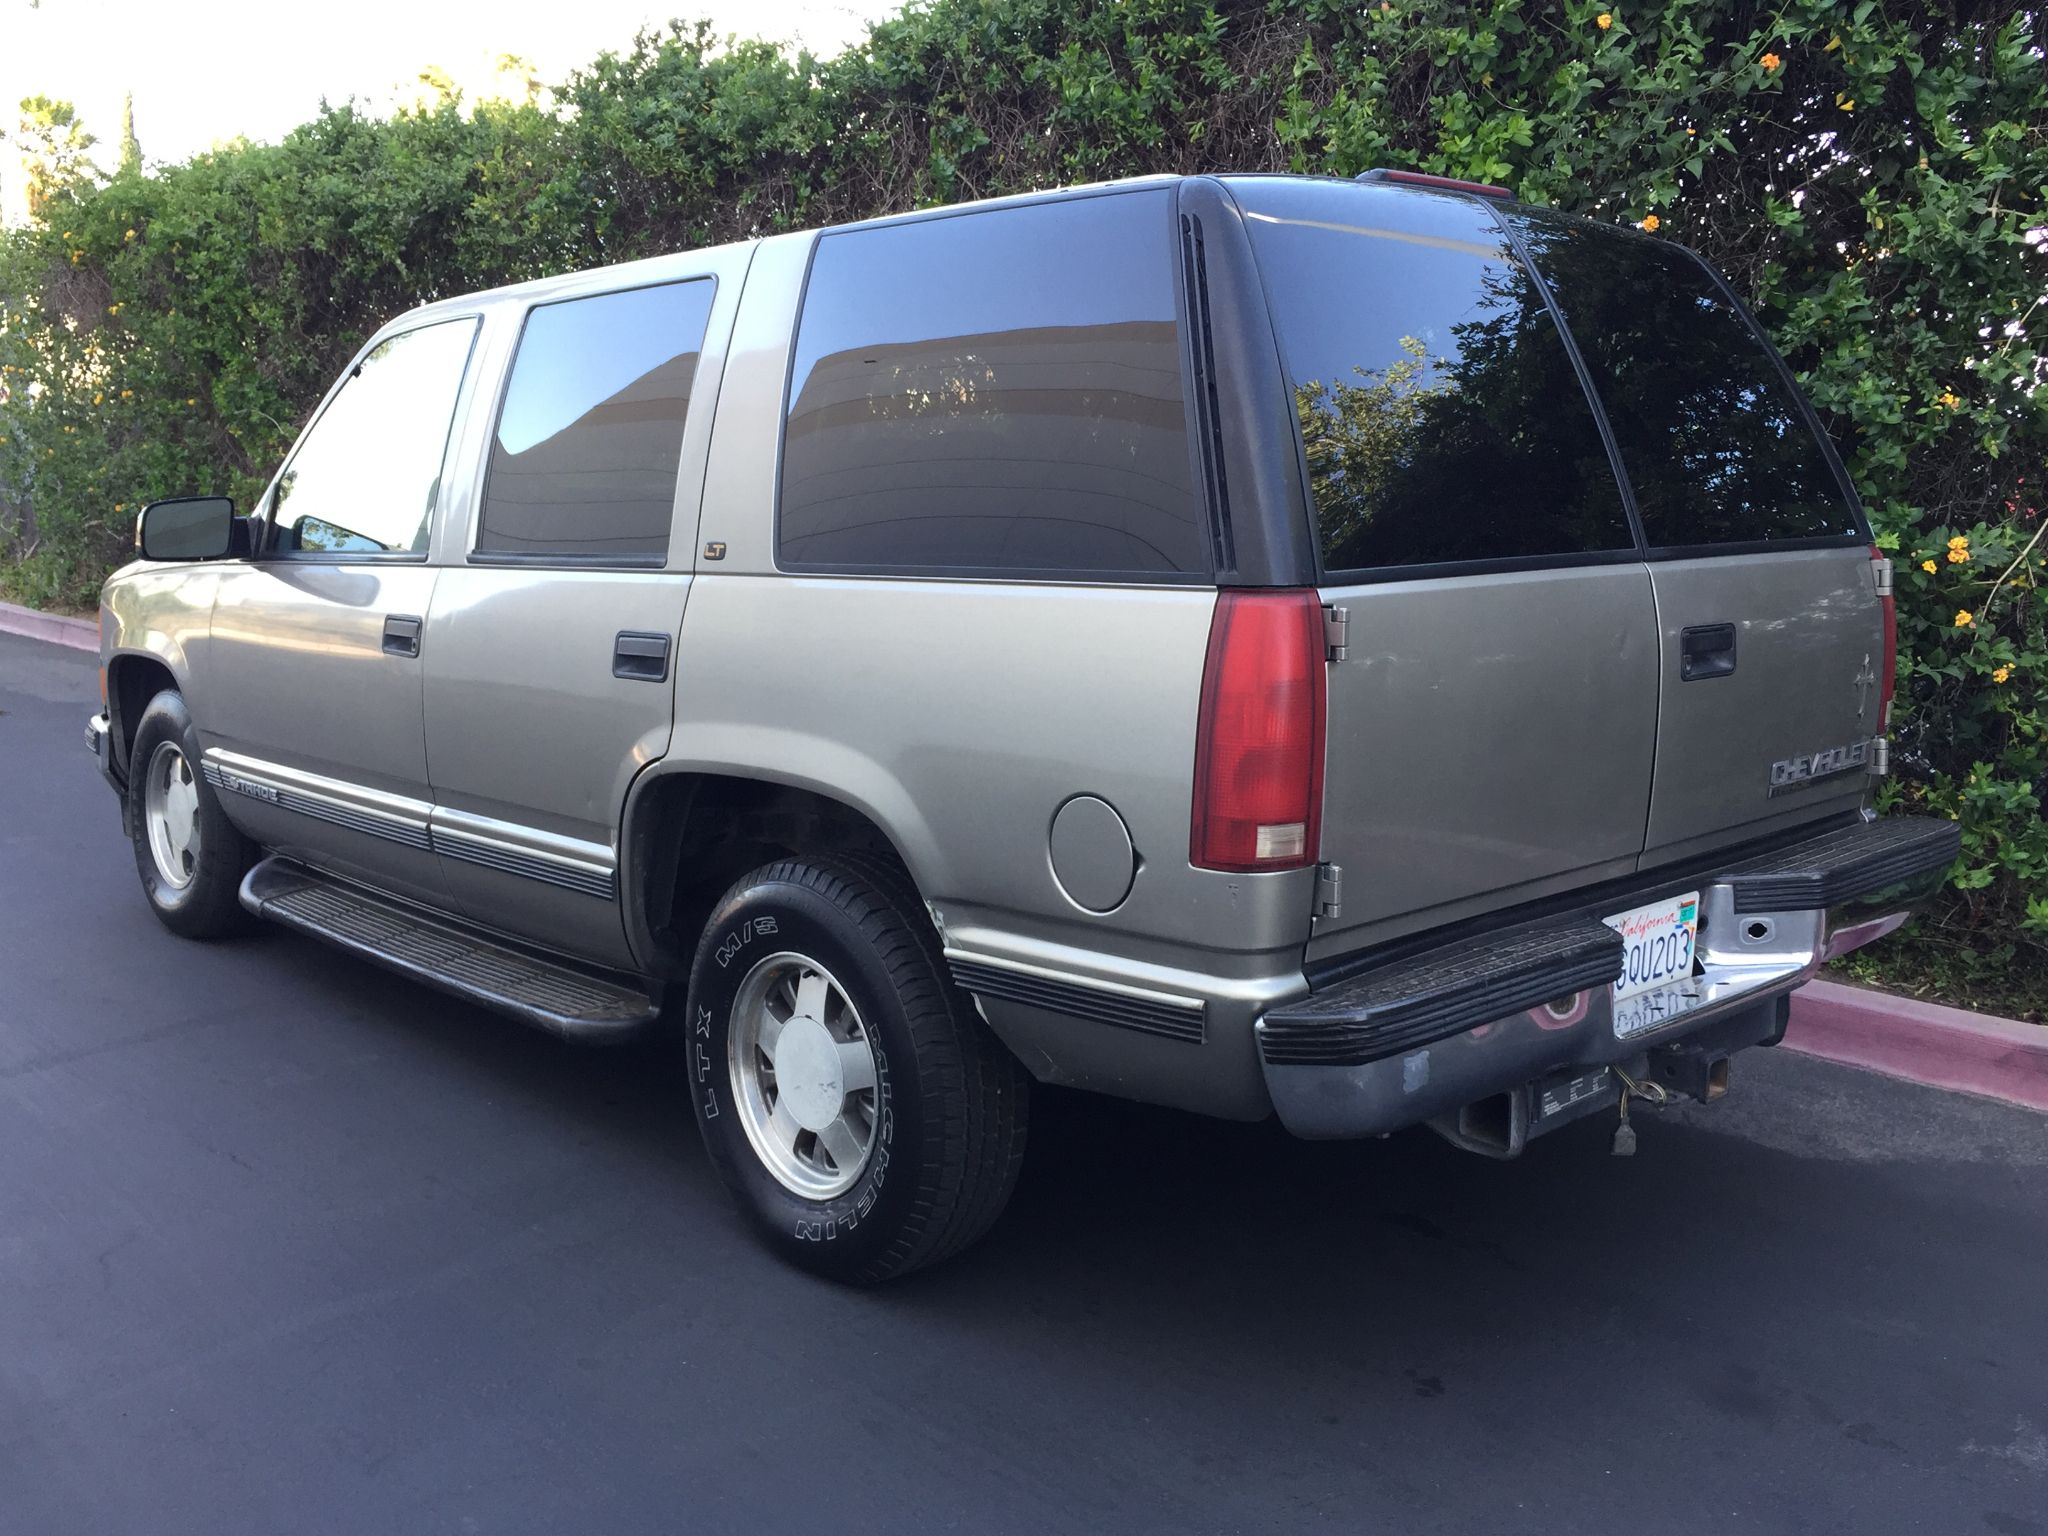 Used 1999 Chevrolet Tahoe Limited at City Cars Warehouse INC